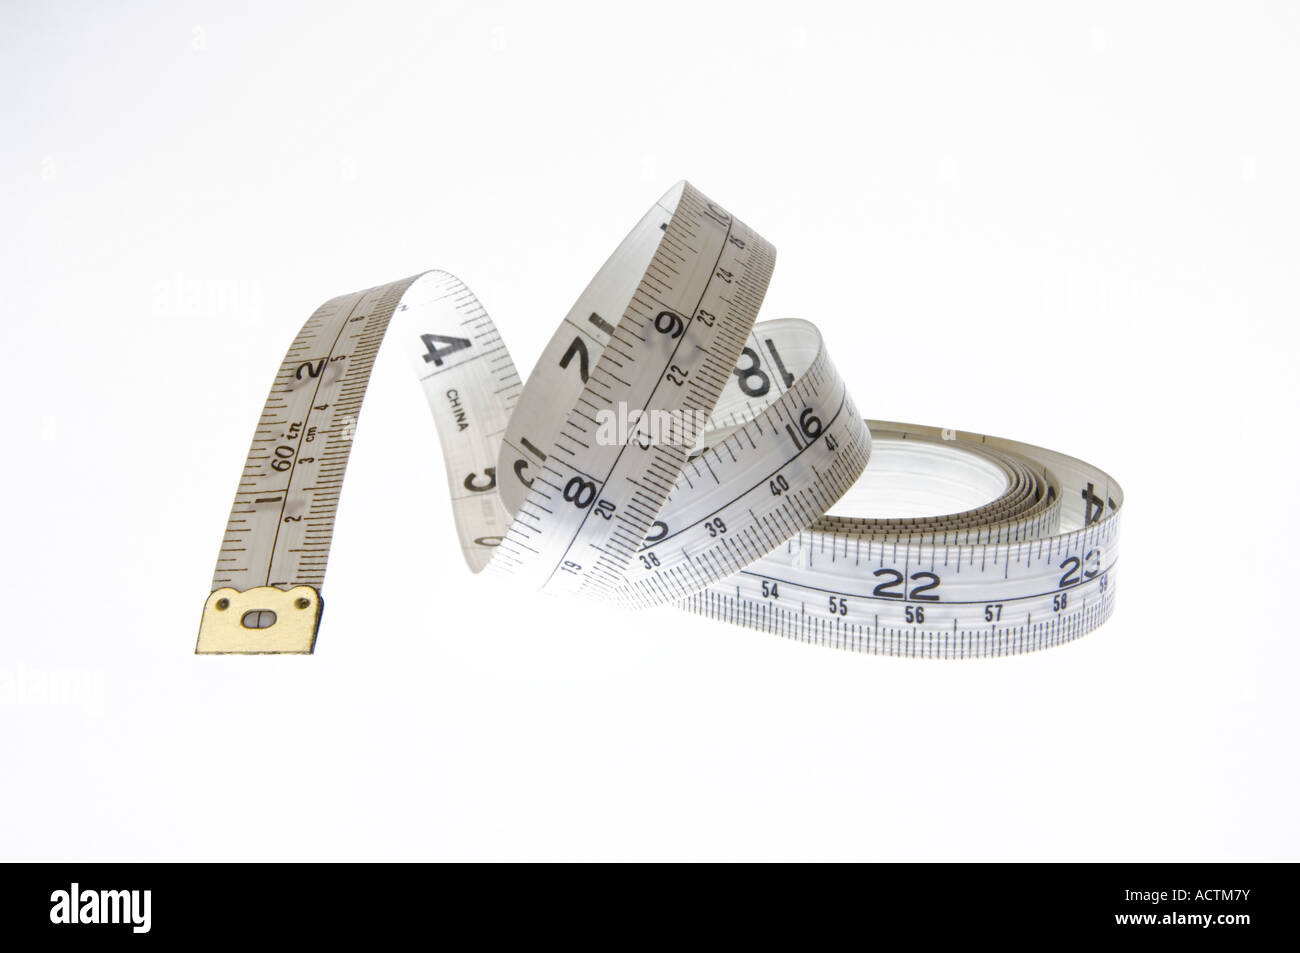 Tape measure in centimeters Stock Photo by NomadSoul1